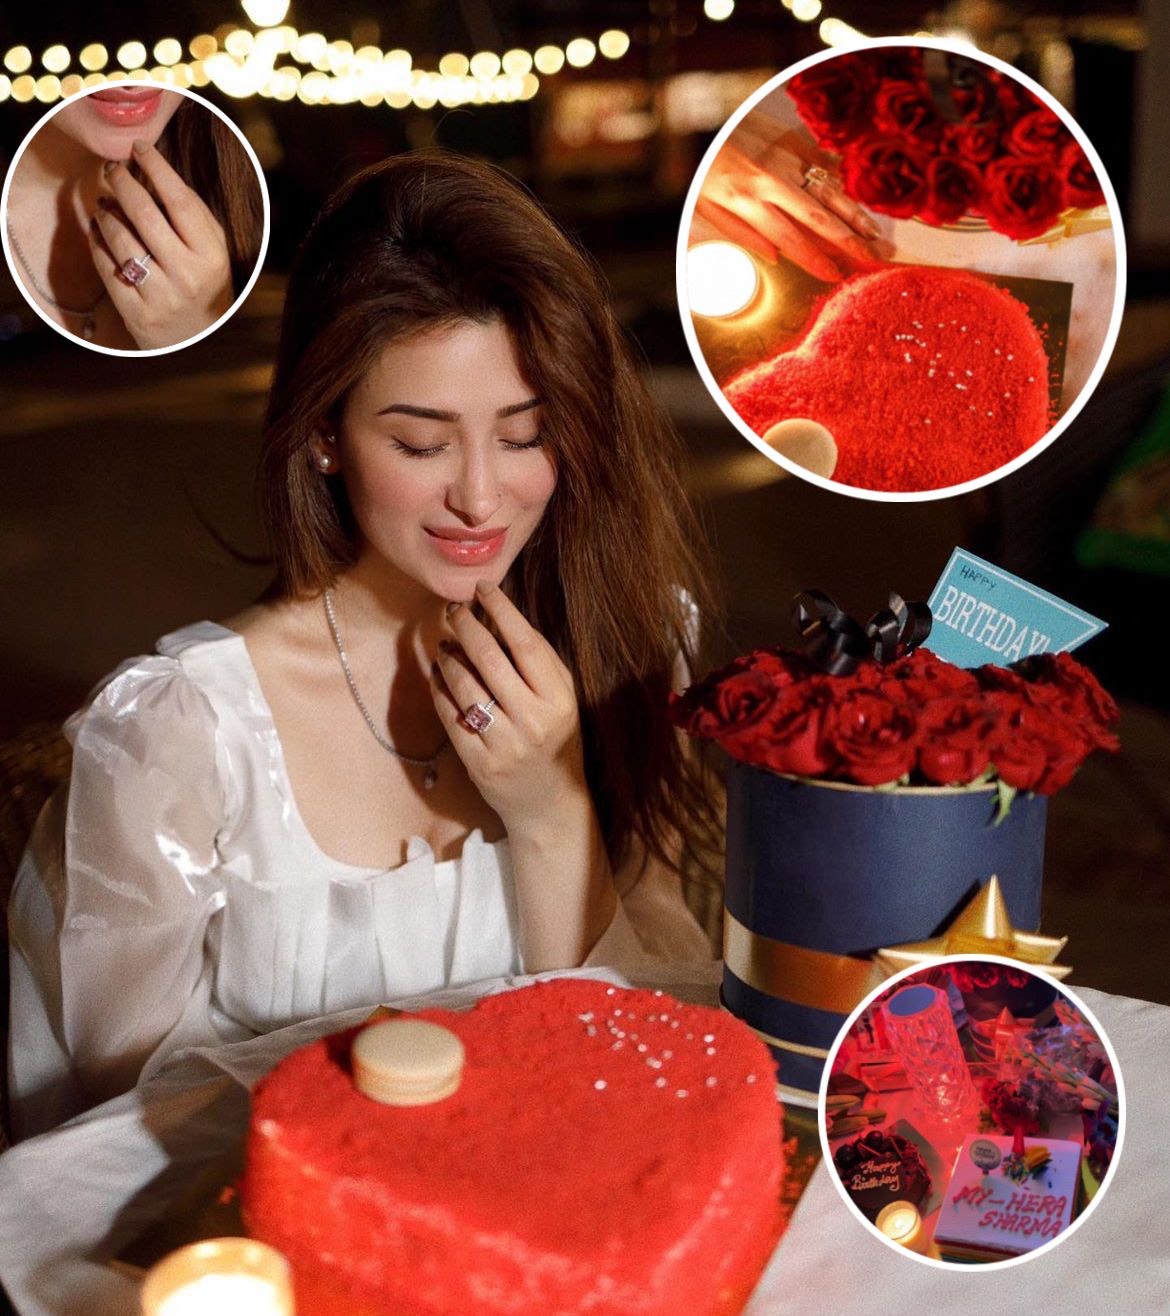 Mahira Sharma drops pictures of her birthday celebration with red roses, heart-shaped cake and a ring! Is she celebrating with someone special?